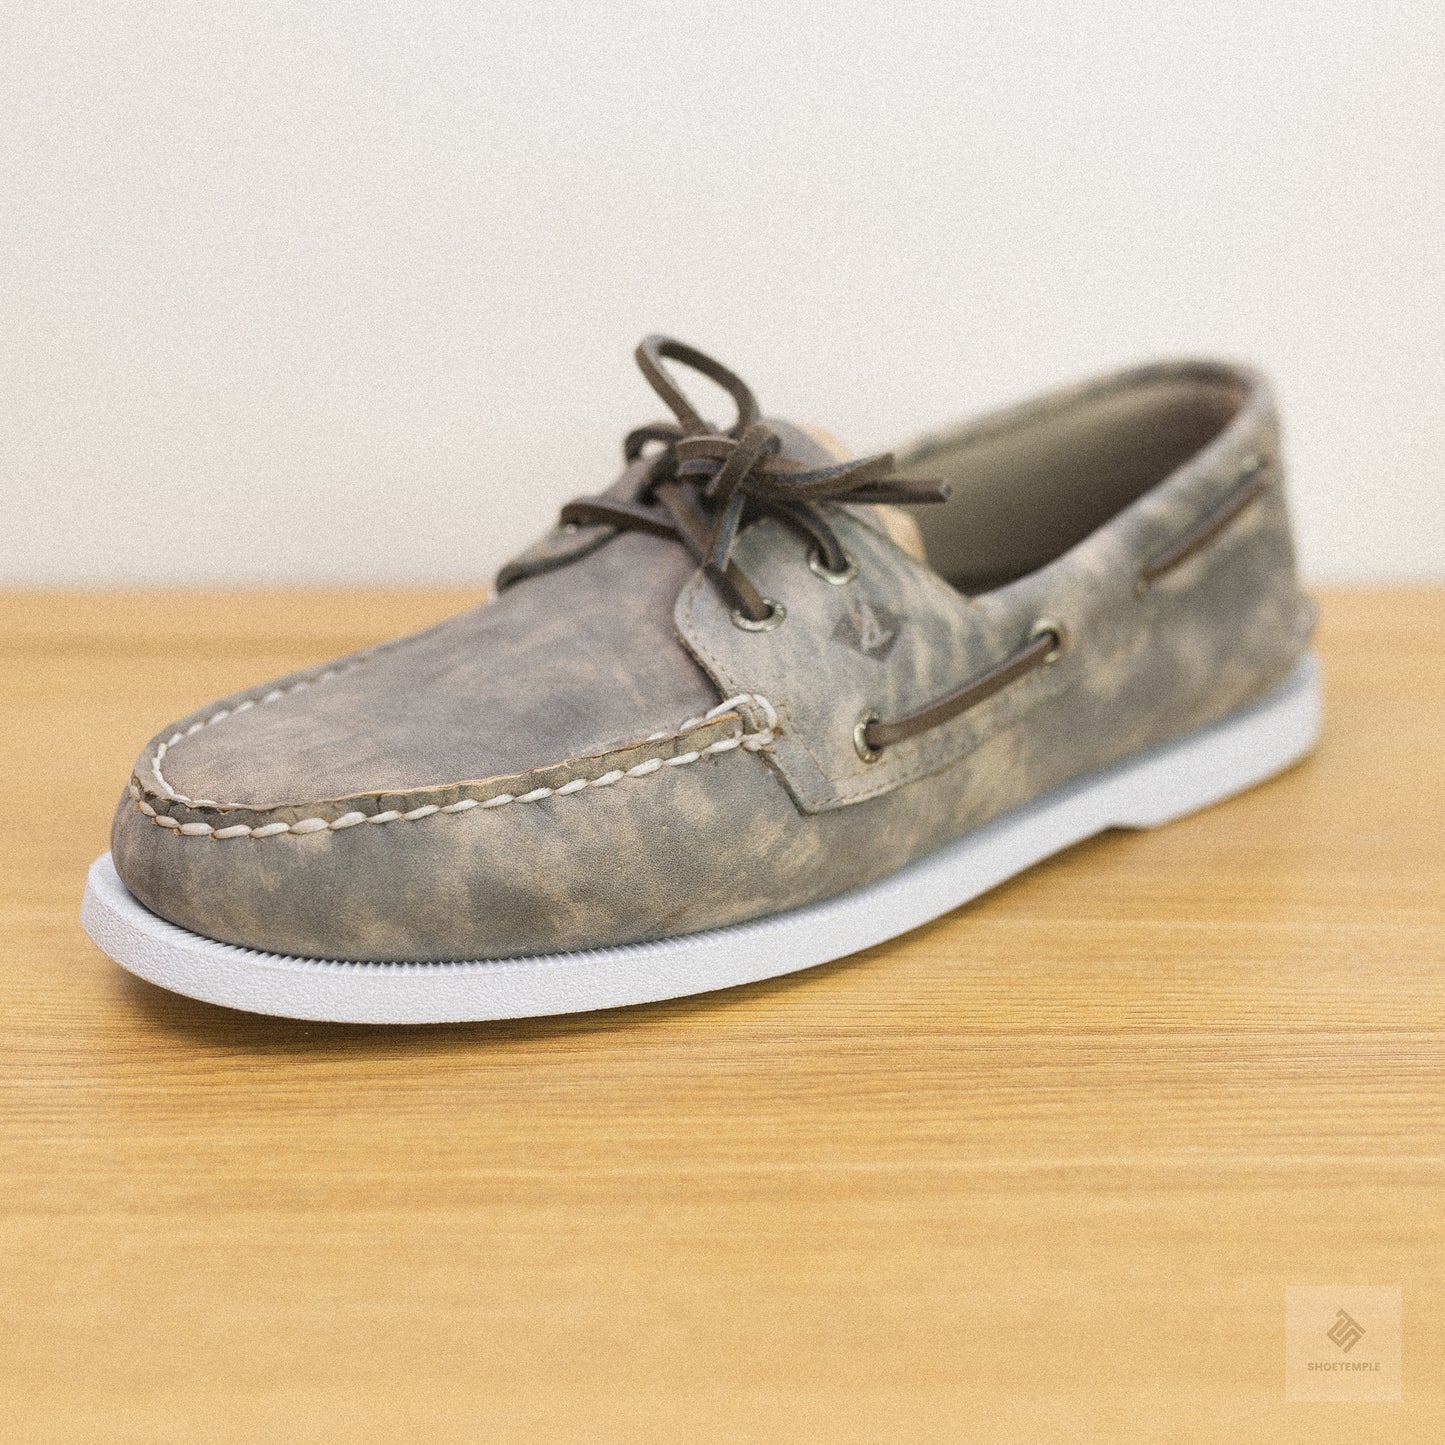 Sperry Top Sider Boat Shoes